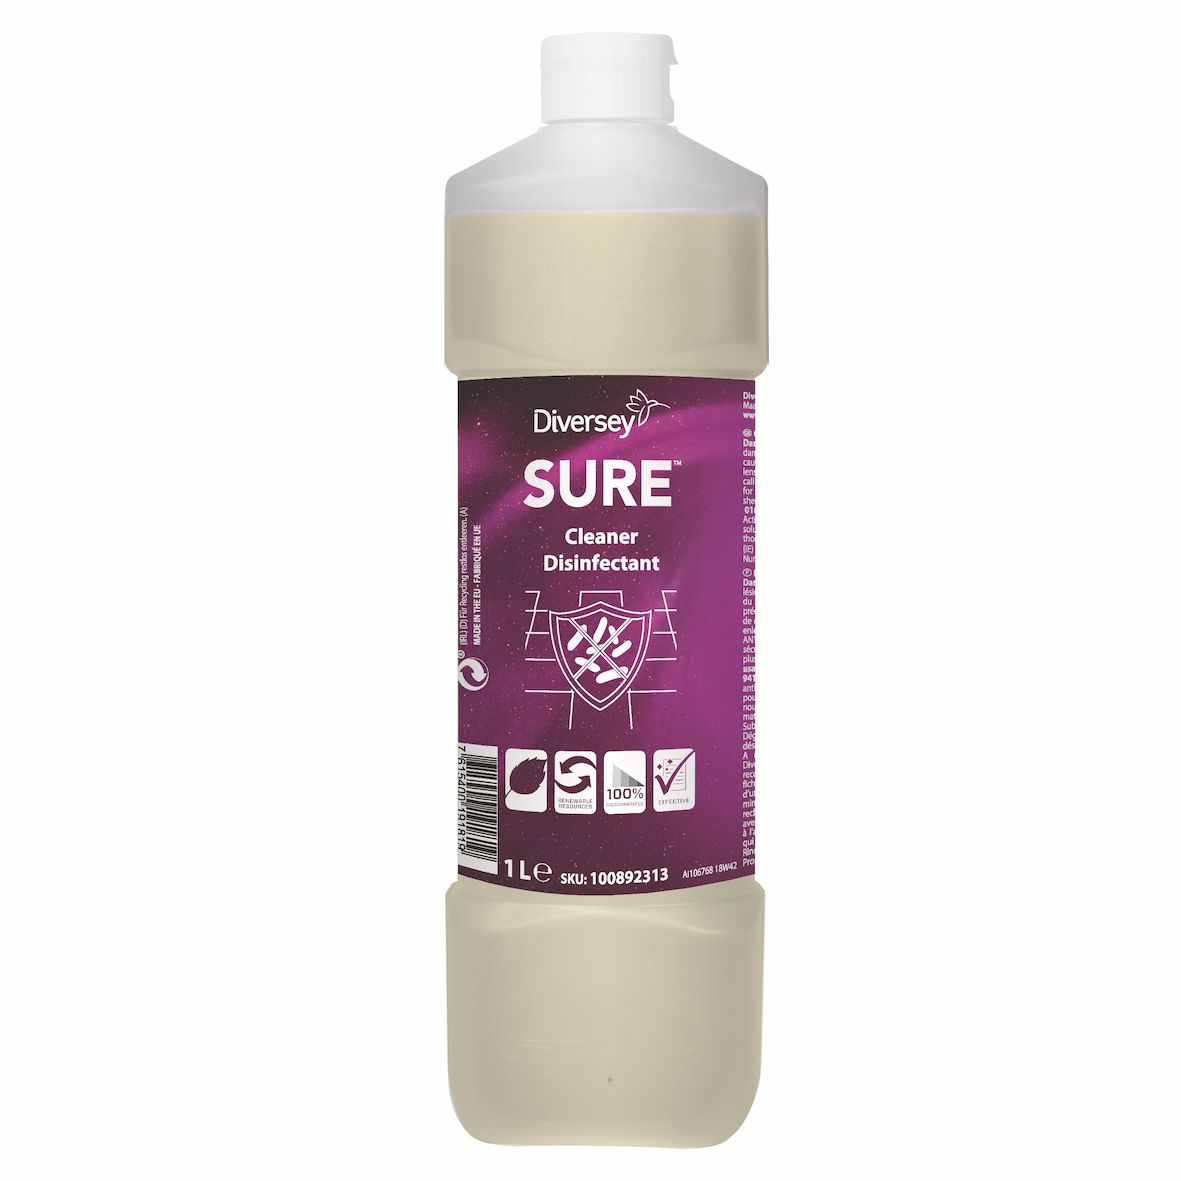 SURE Cleaner Disinfectant